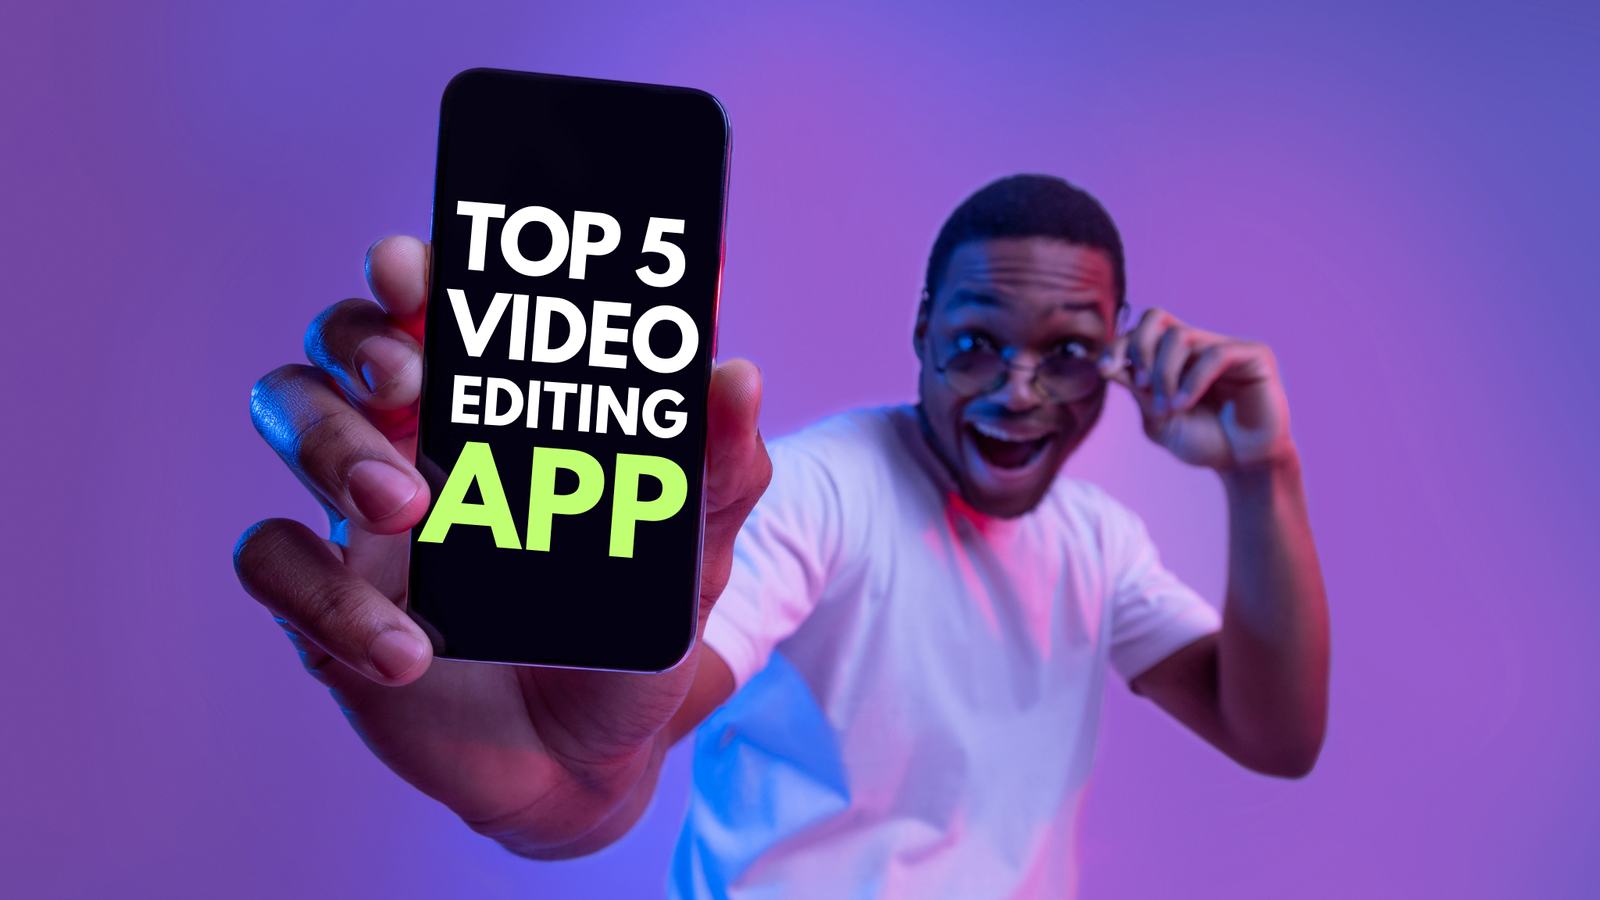 Top 5 Video Editing Apps for Beginners.